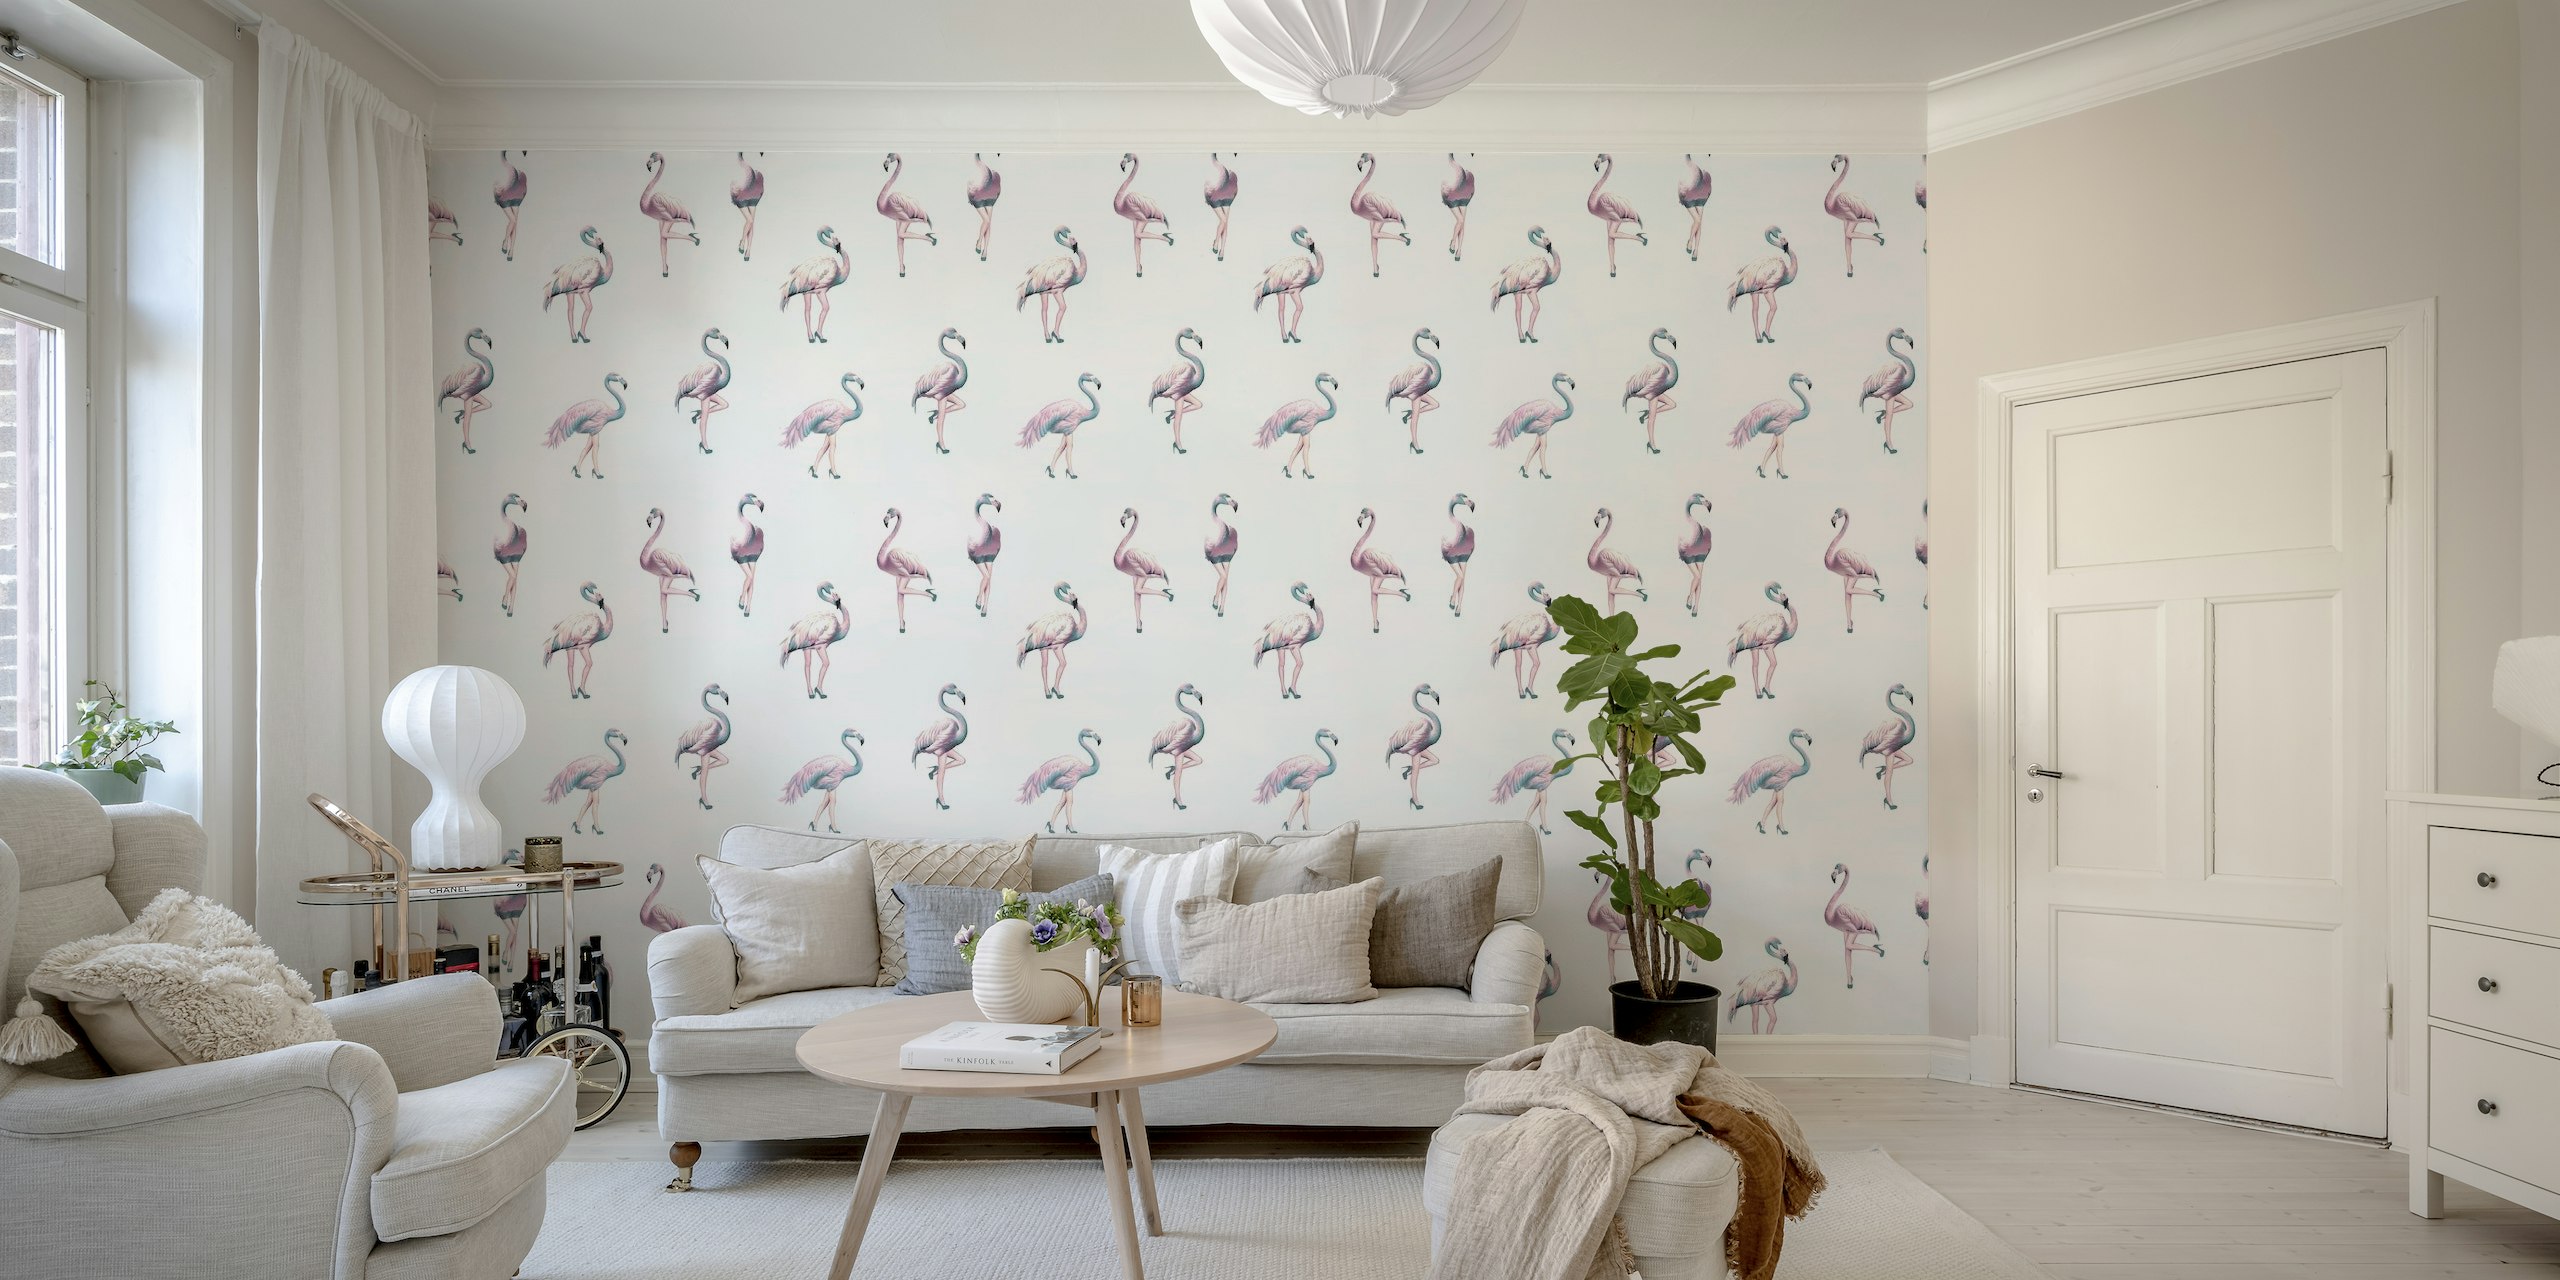 Stylish flamingo silhouettes wall mural in shades of aqua blue, pink, and teal.